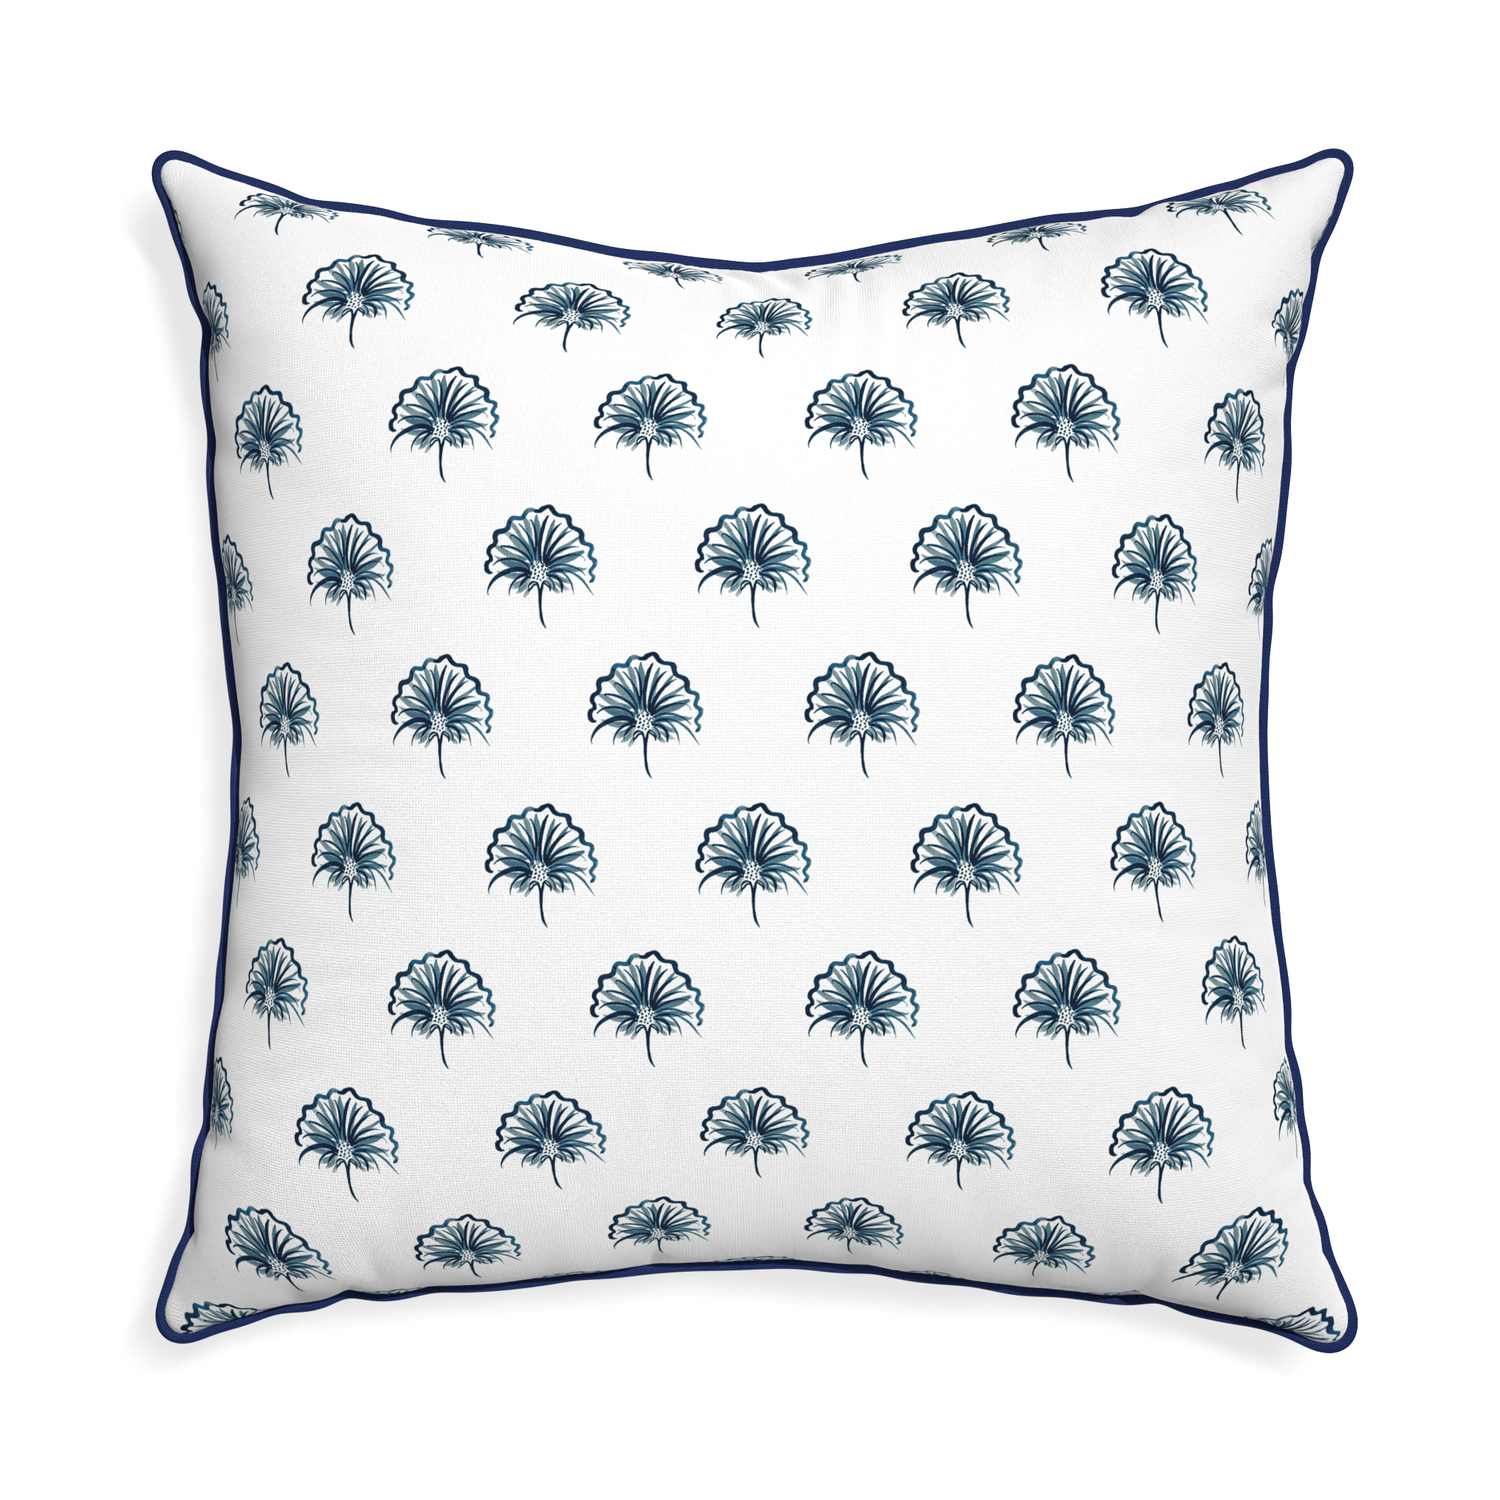 Euro-sham penelope midnight custom pillow with midnight piping on white background